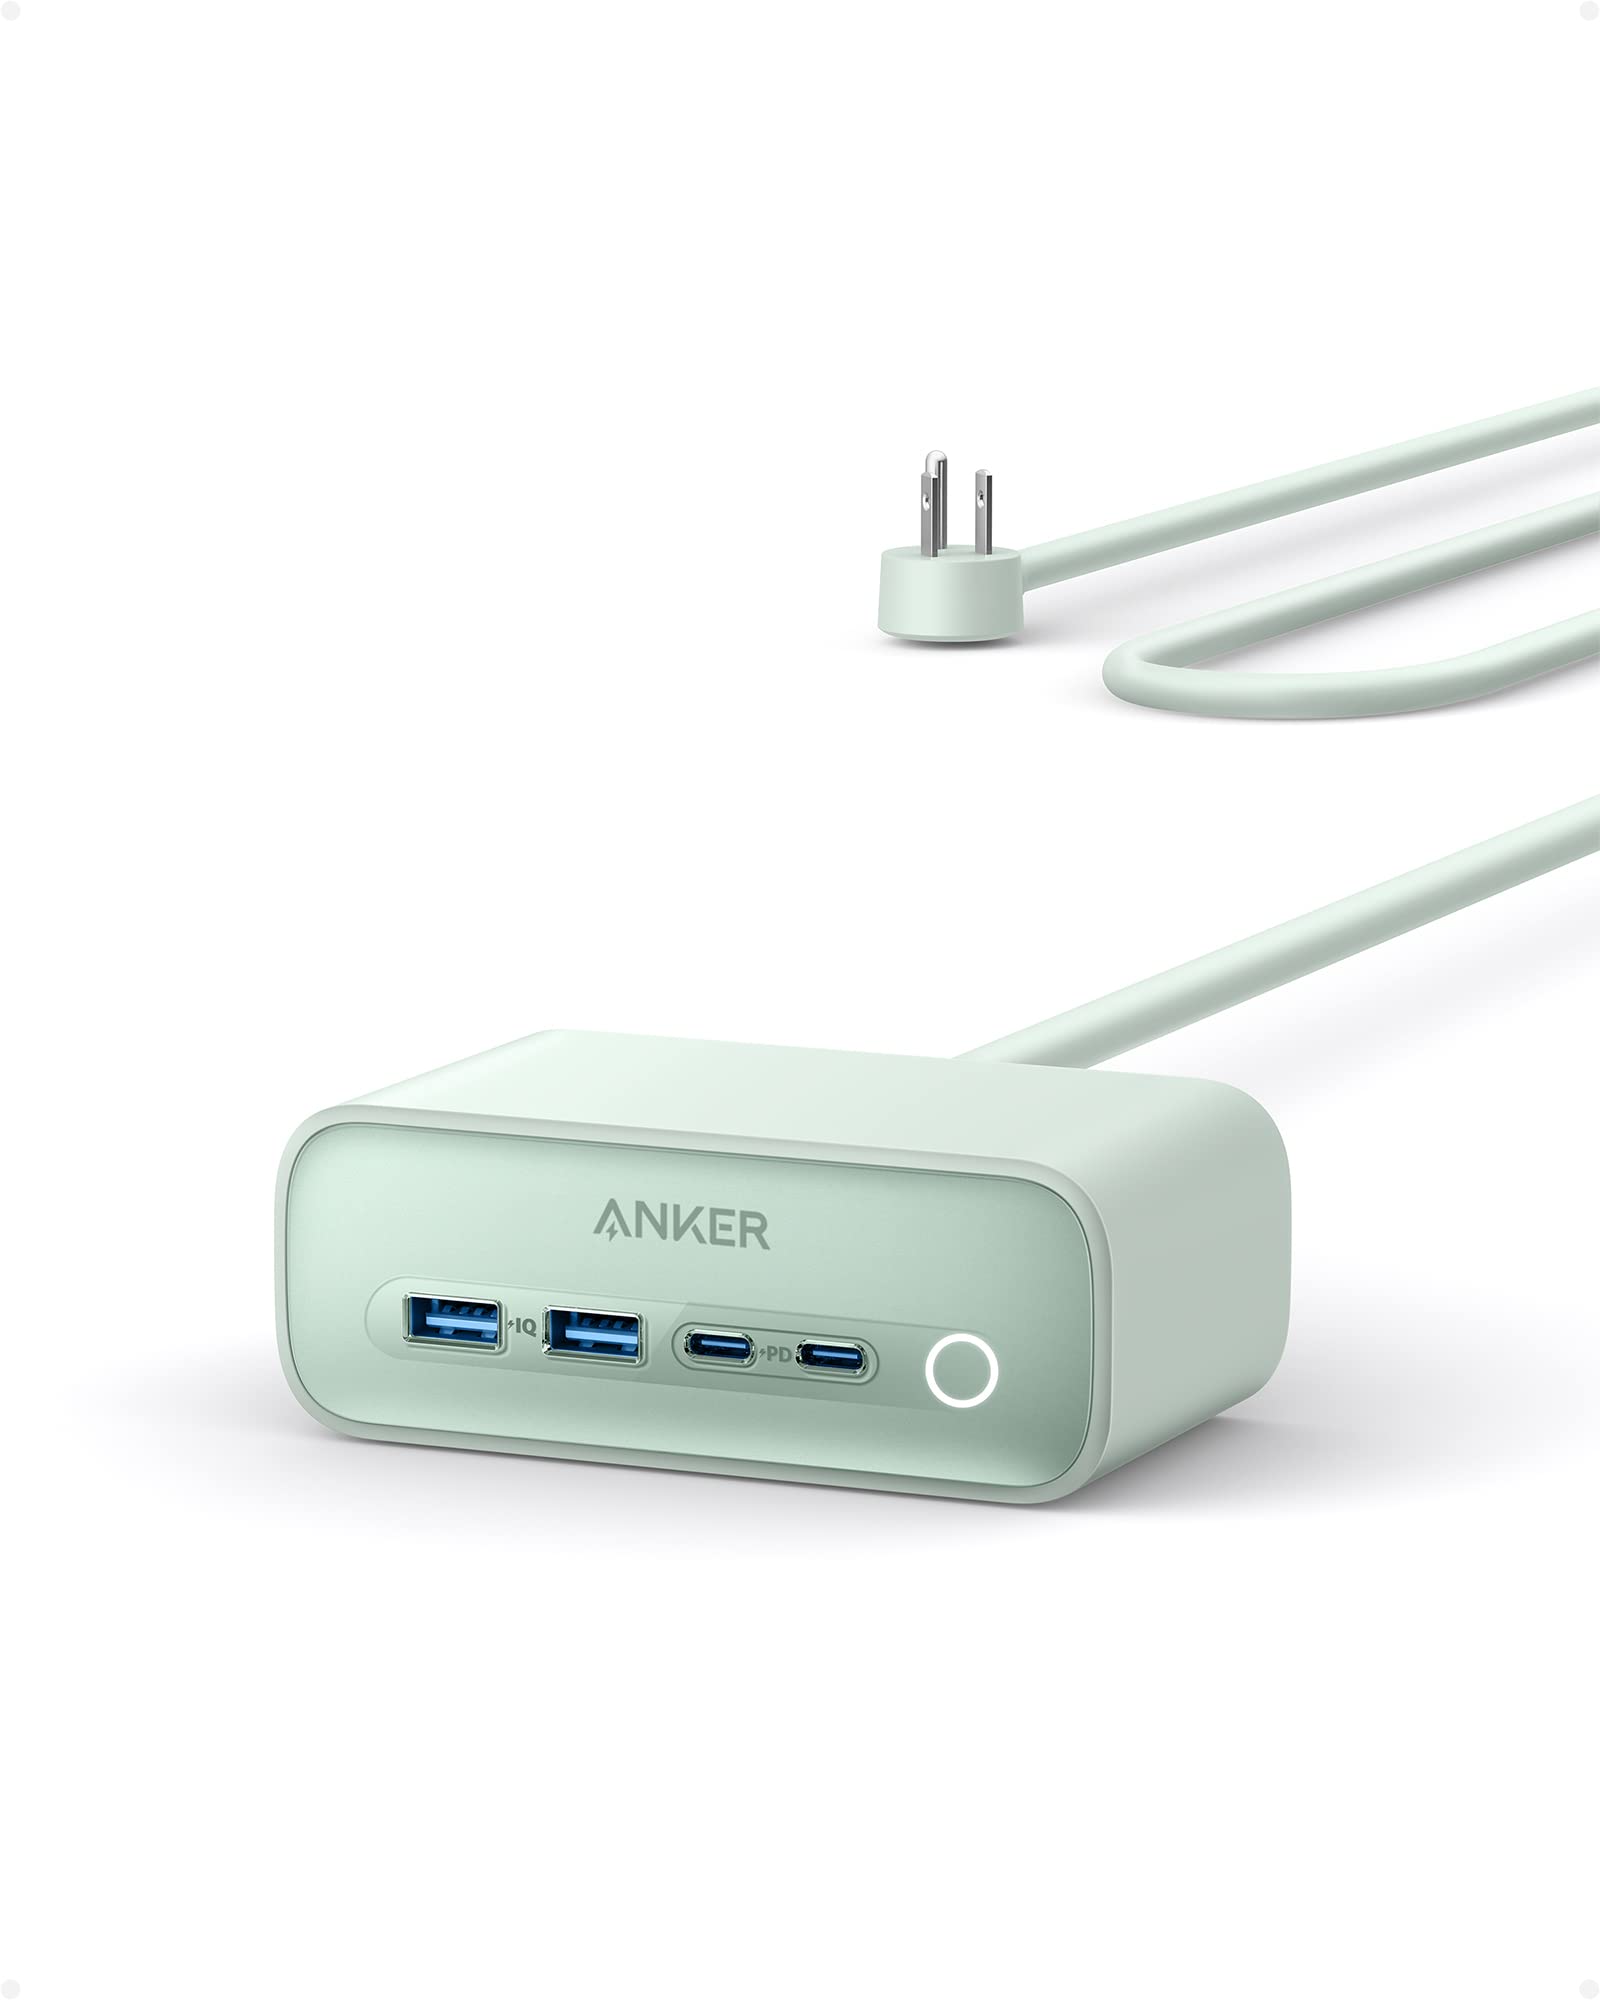 Anker 525 7-in-1 Charging Station (Green) $33+ Free Shipping w/ Prime or on $35+